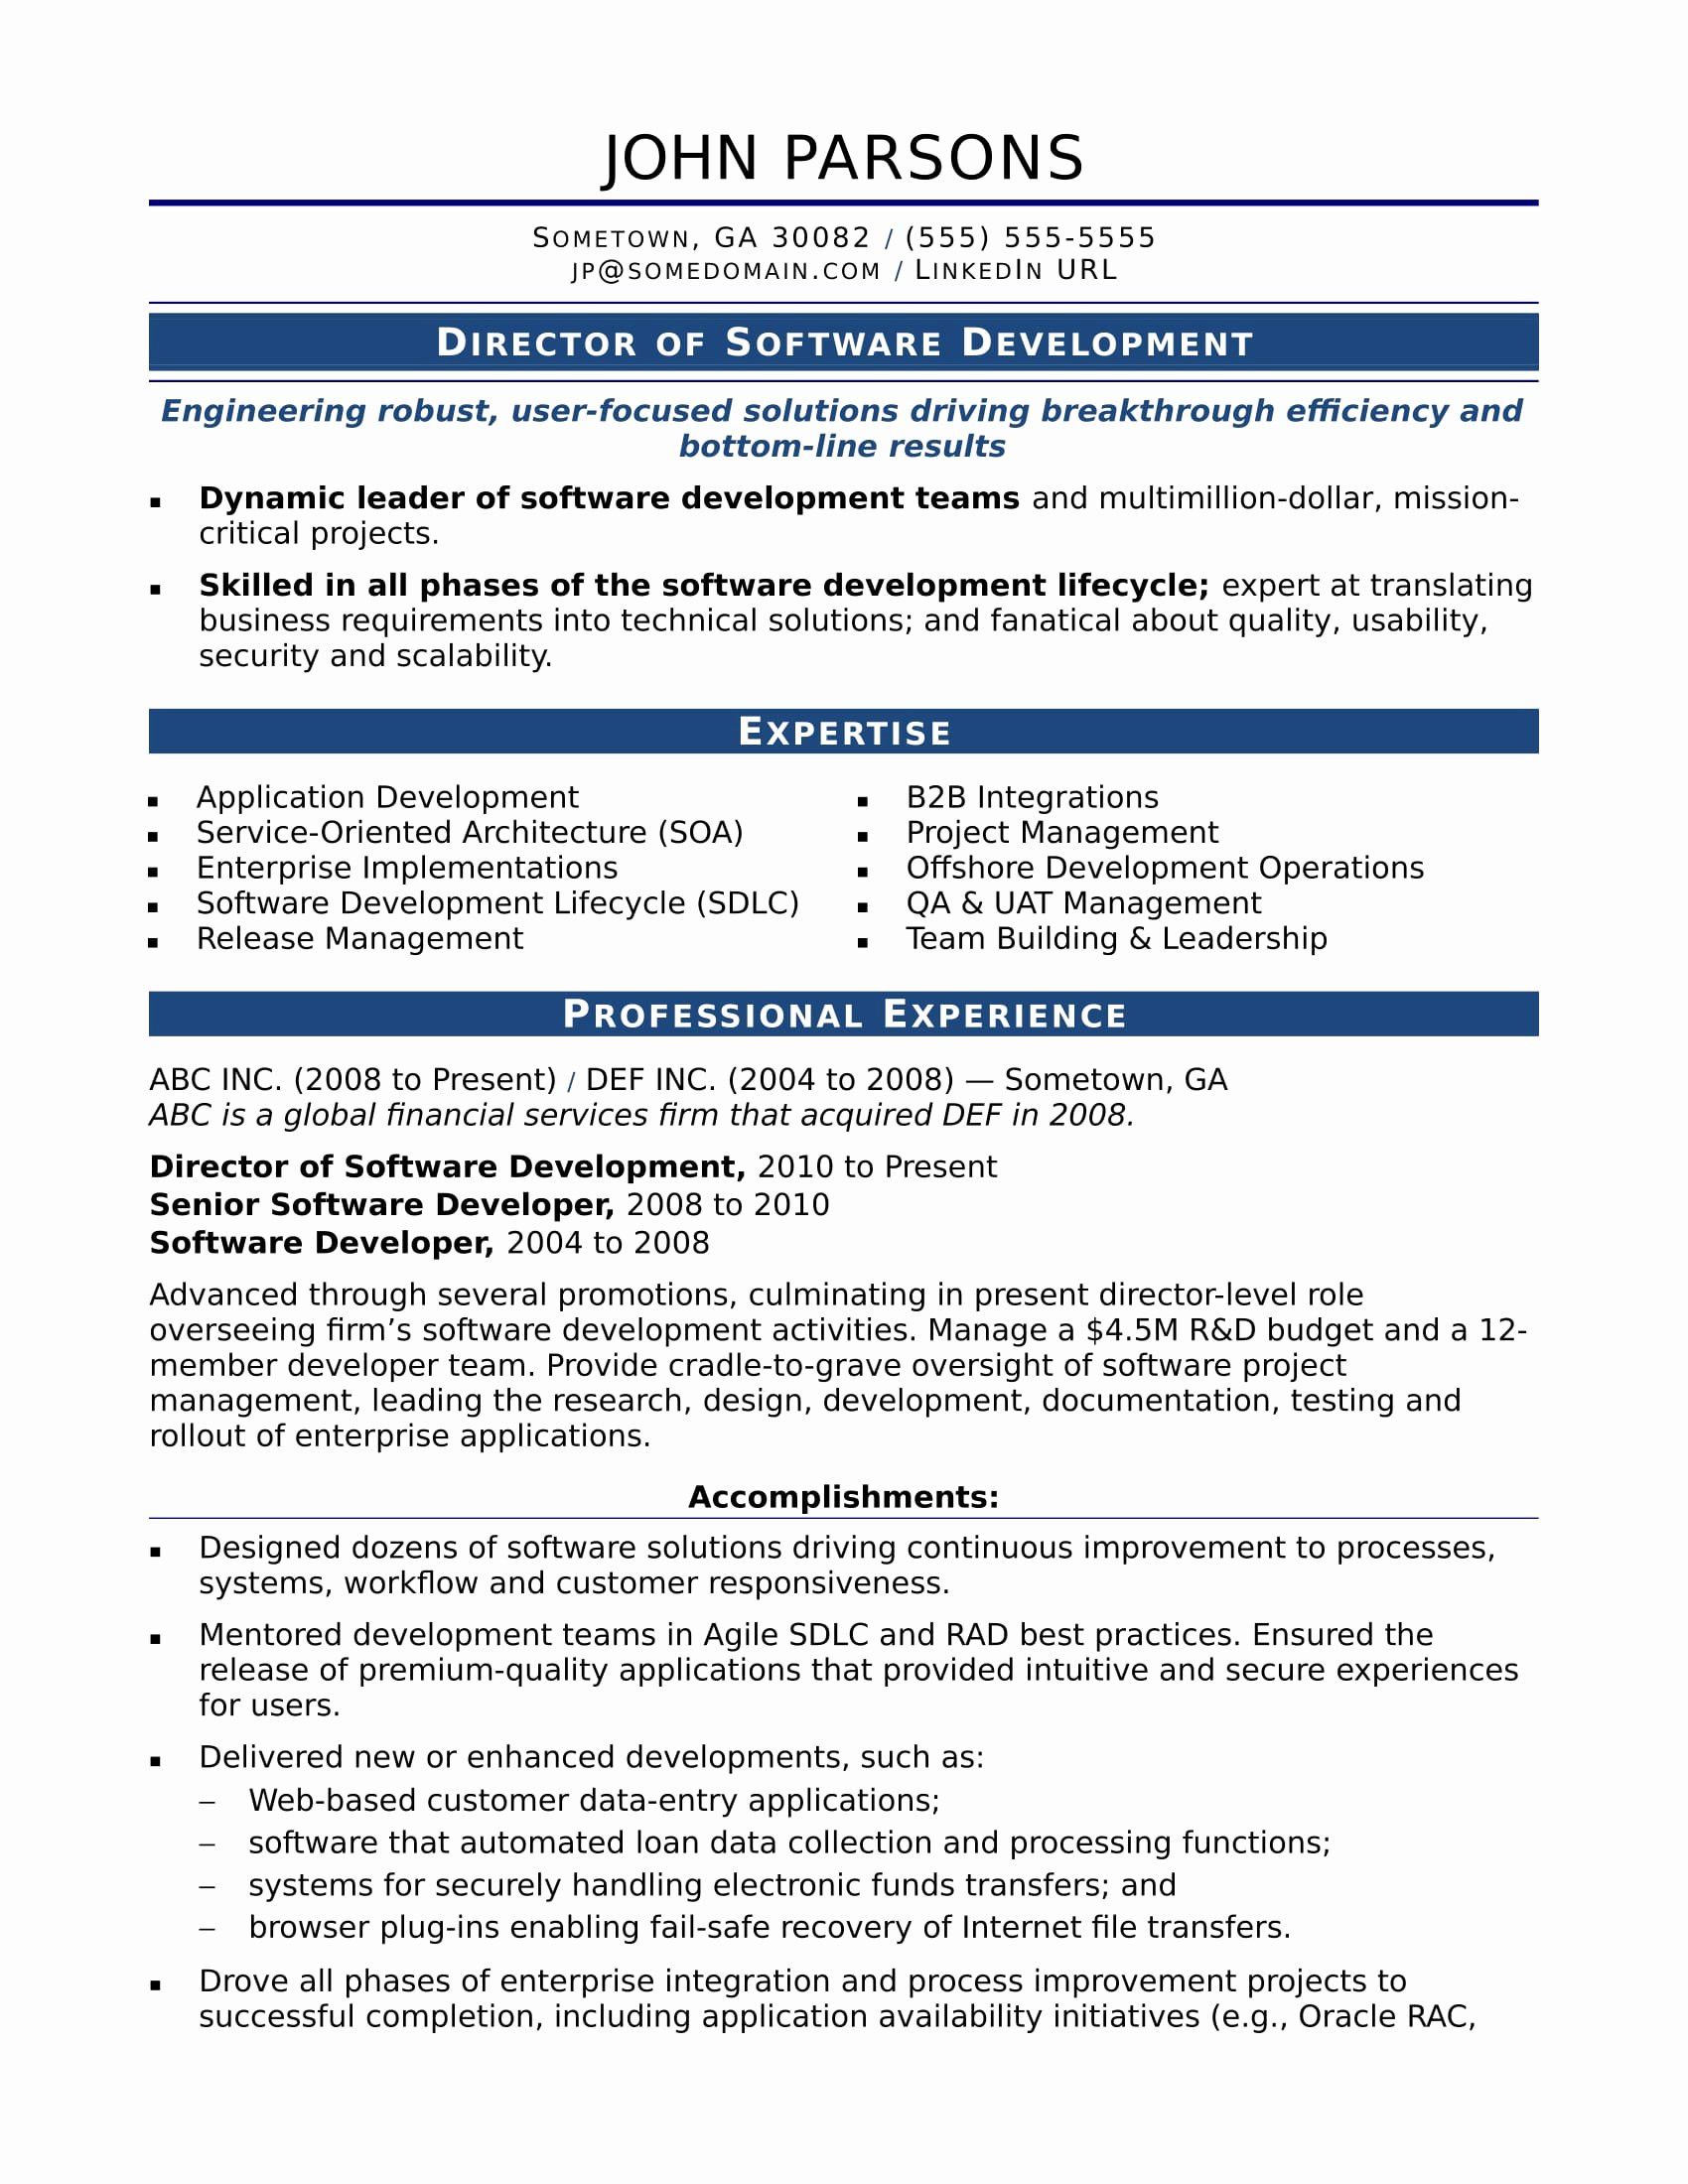 Sample Resume for 3 Years Experience In Java 20 Java Developer Resume 3 Years Experience